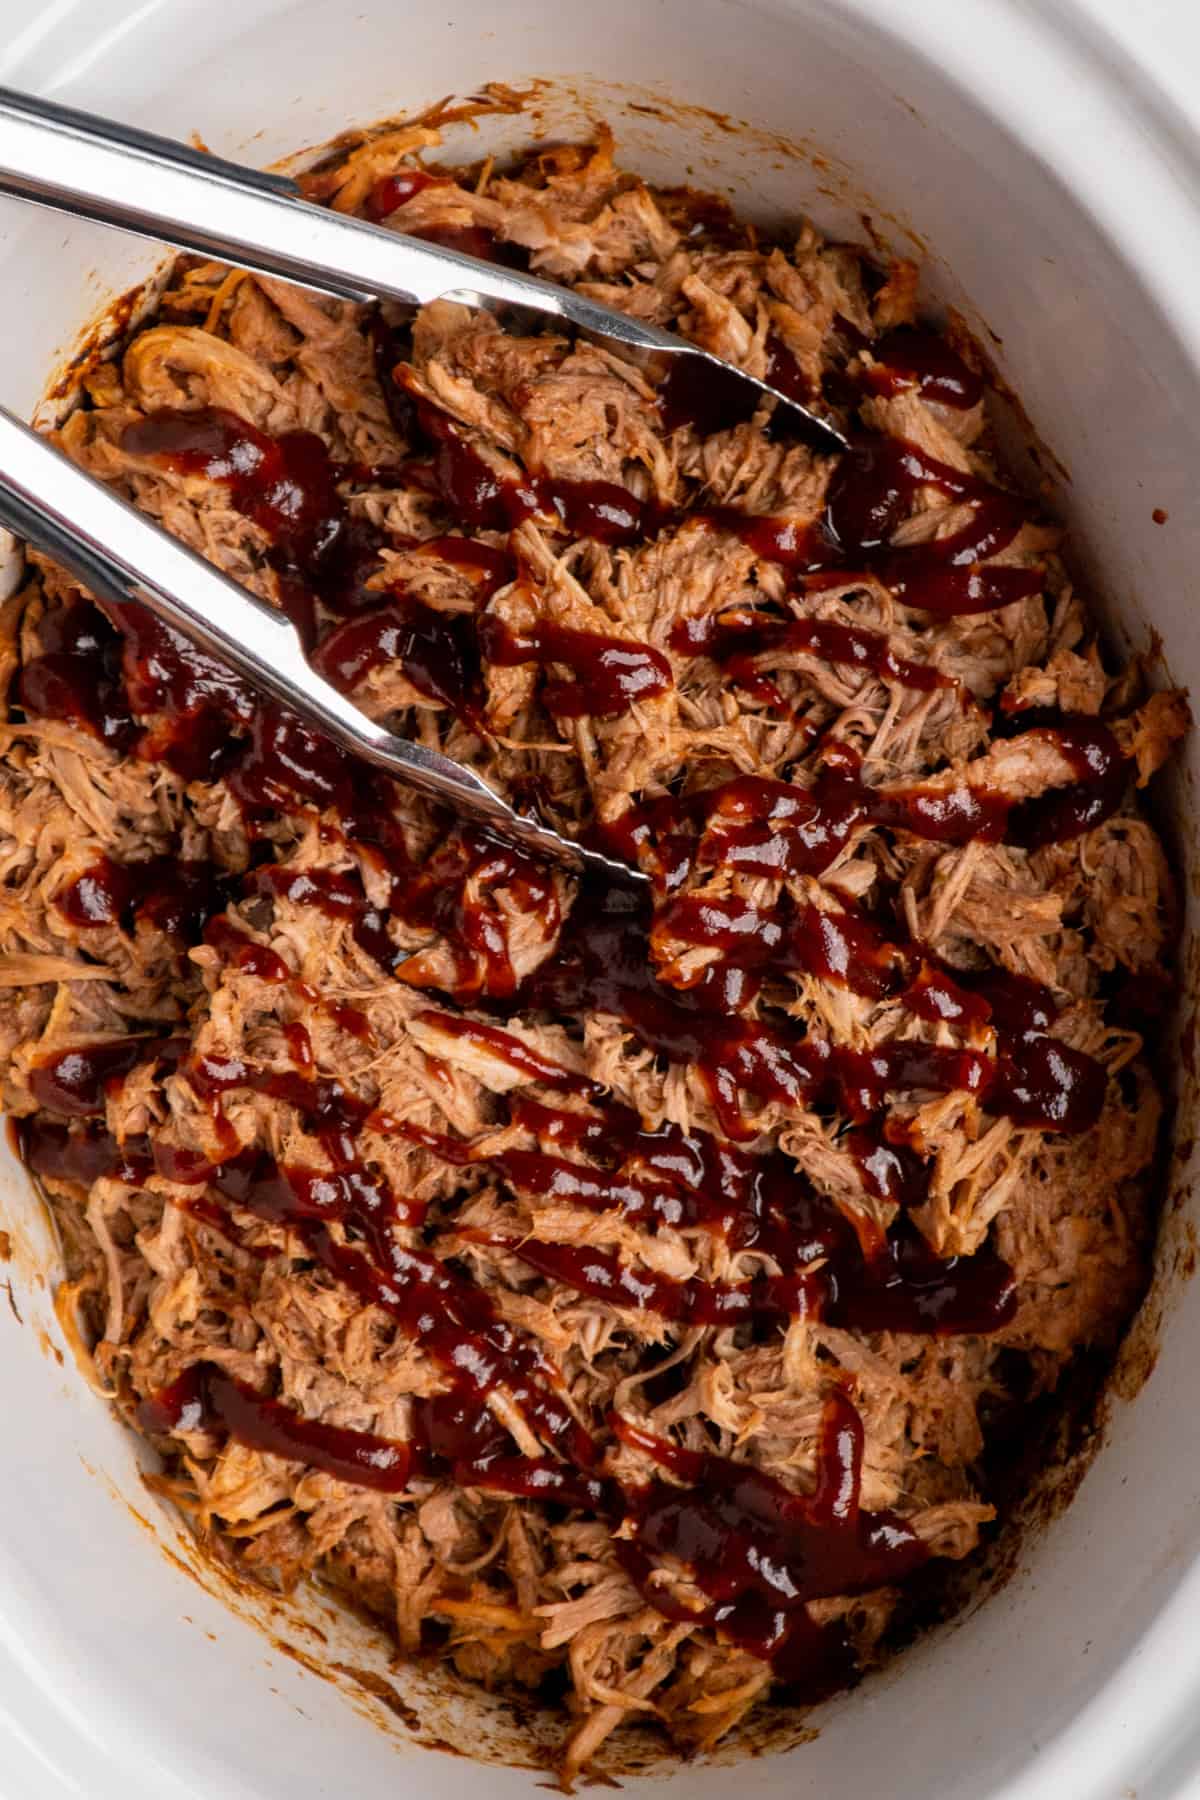 Shredded bbq pork with tongs in a white slow cooker with drizzled barbecue sauce.